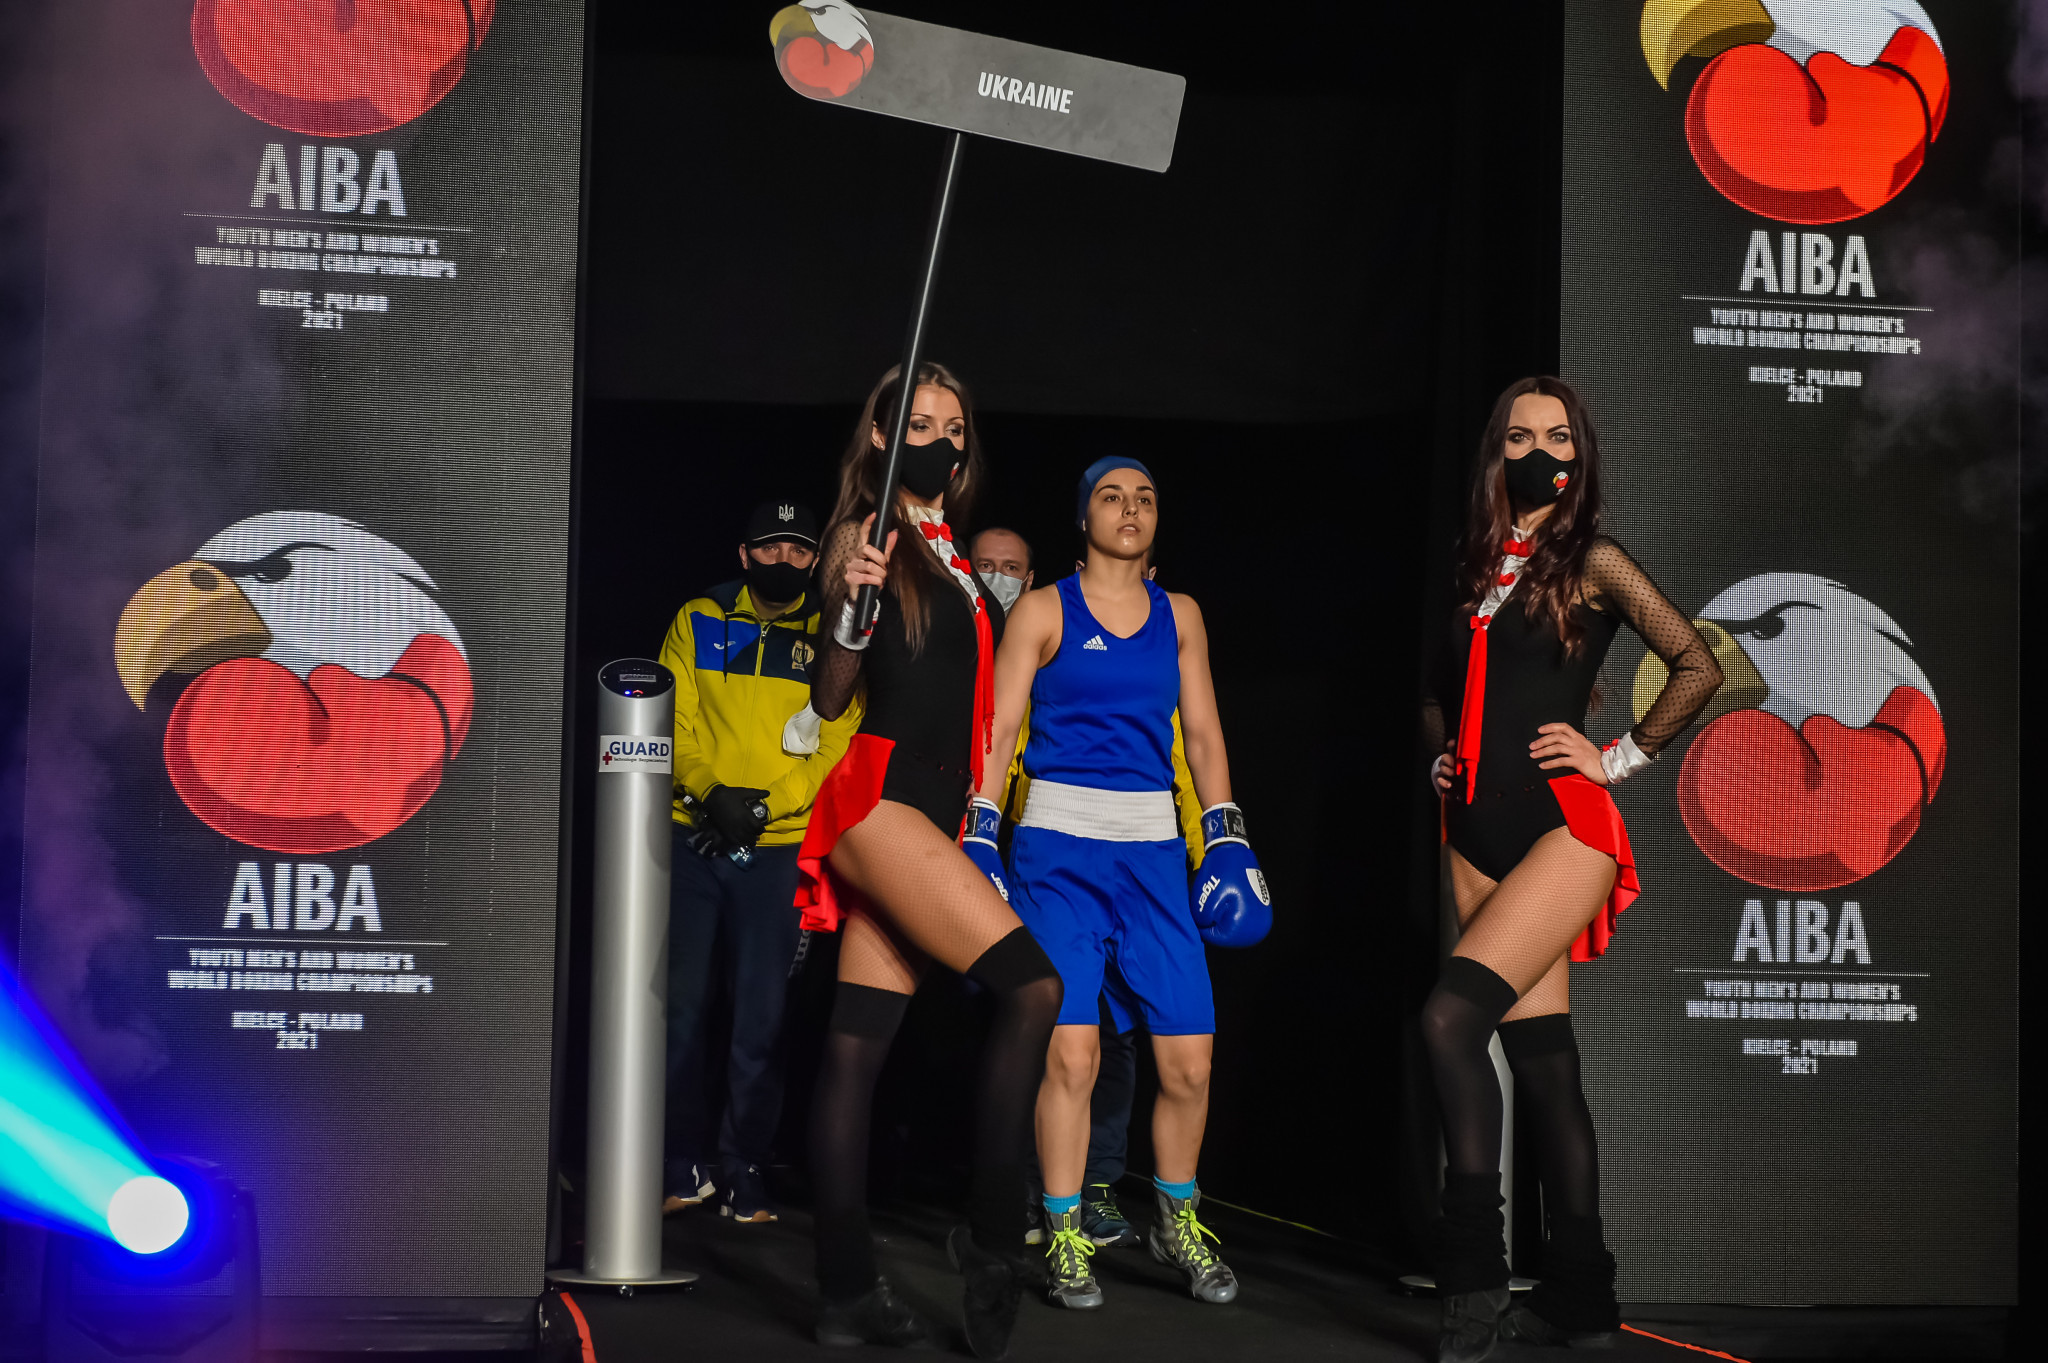 Khrystyna Lakiichuk of Ukraine enters the ring for the women's bantamweight final ©AIBA